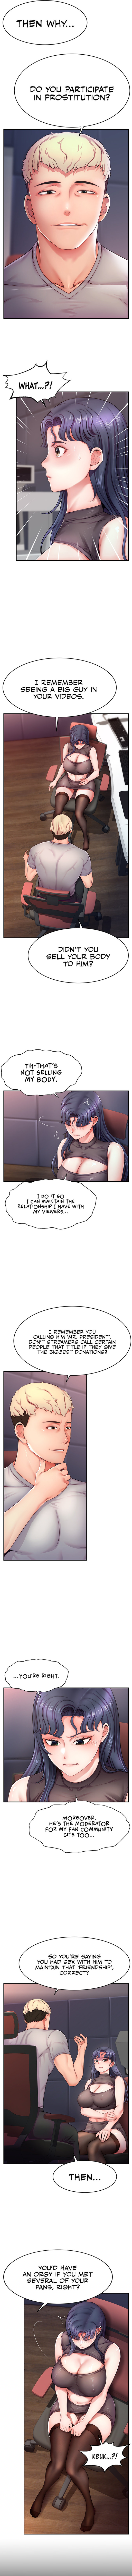 Making Friends With Streamers by Hacking! Chapter 2 - Page 2